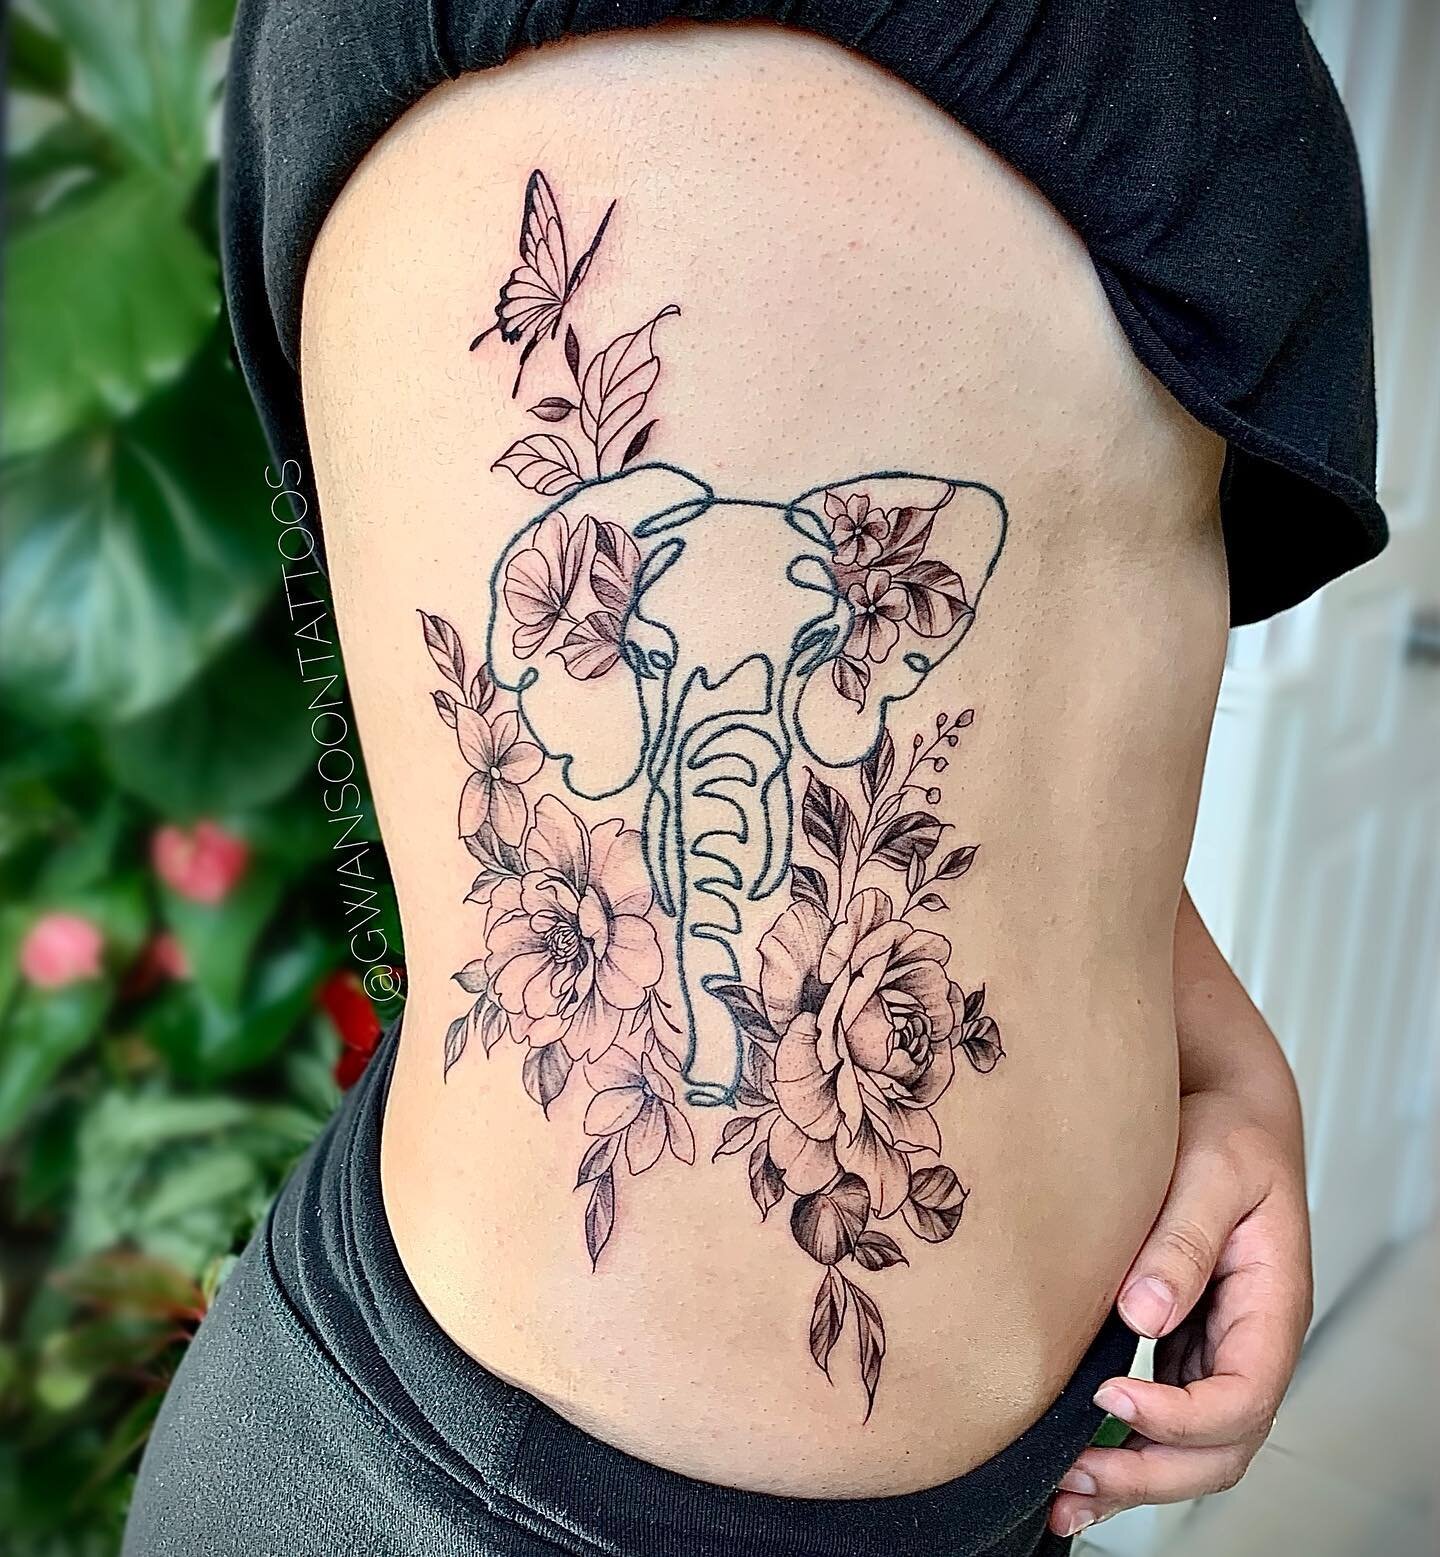 Added some florals &amp; butterfly to revamp an existing elephant tattoo for Riya 🌸Elephant was not done by me. _________________________________________________ 

Follow us @gwansoontattoos ✍🏼

Artist - @jina.gwansoontattoos
______________________